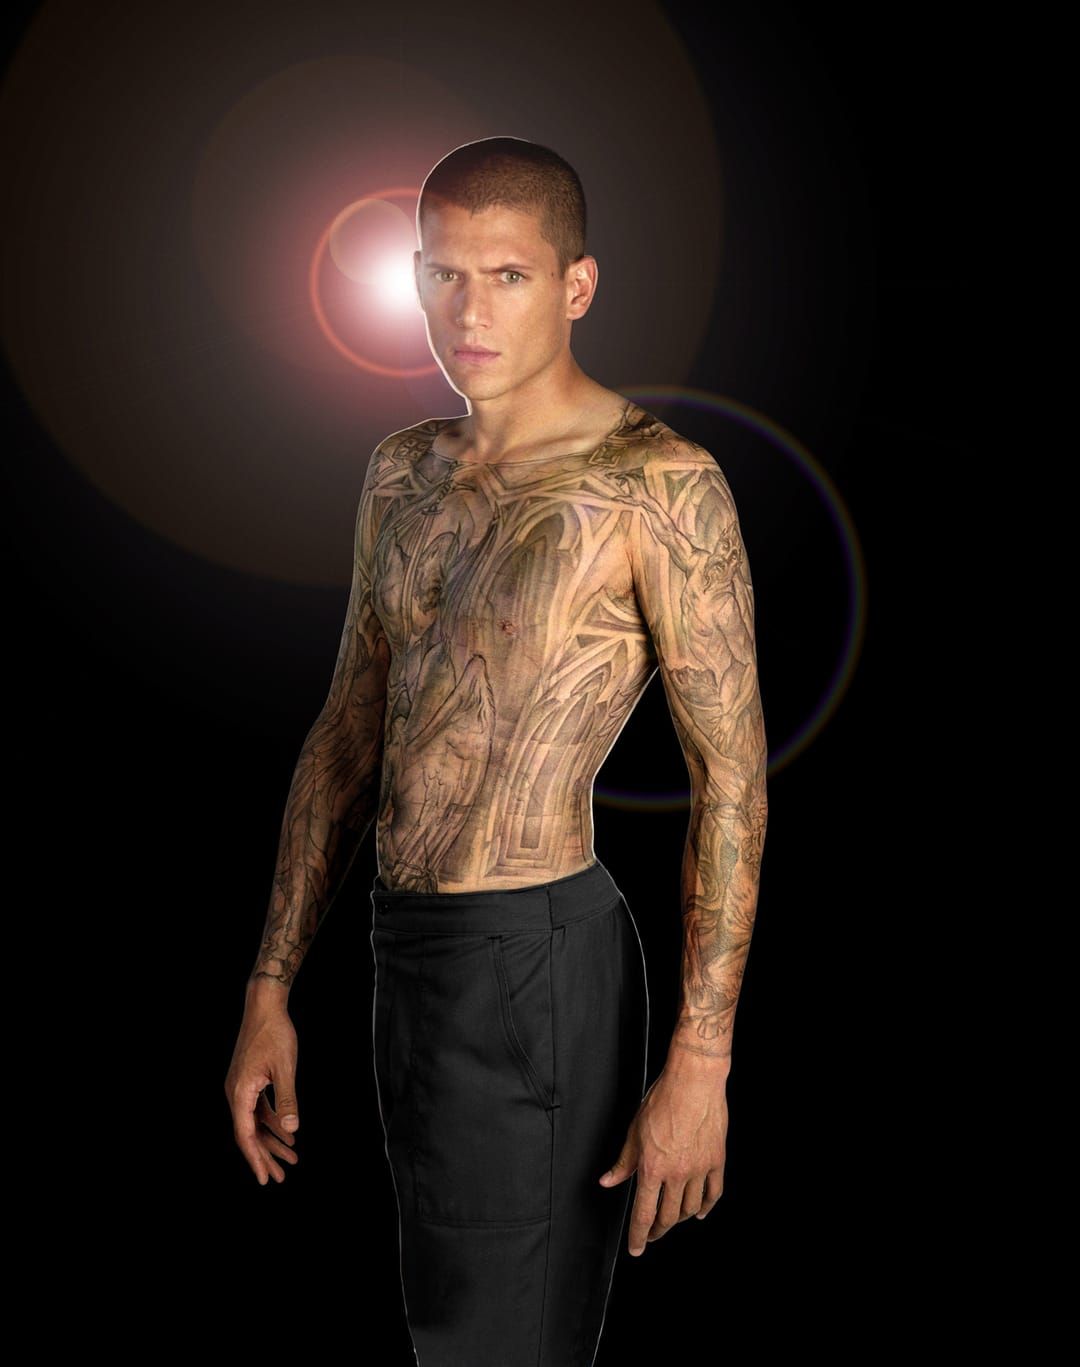 The fake bodysuit had to be scrubbed off and could last weeks if left on, Michael Schofield and his Prison Break tattoo #prisonbreak #michaelschofield